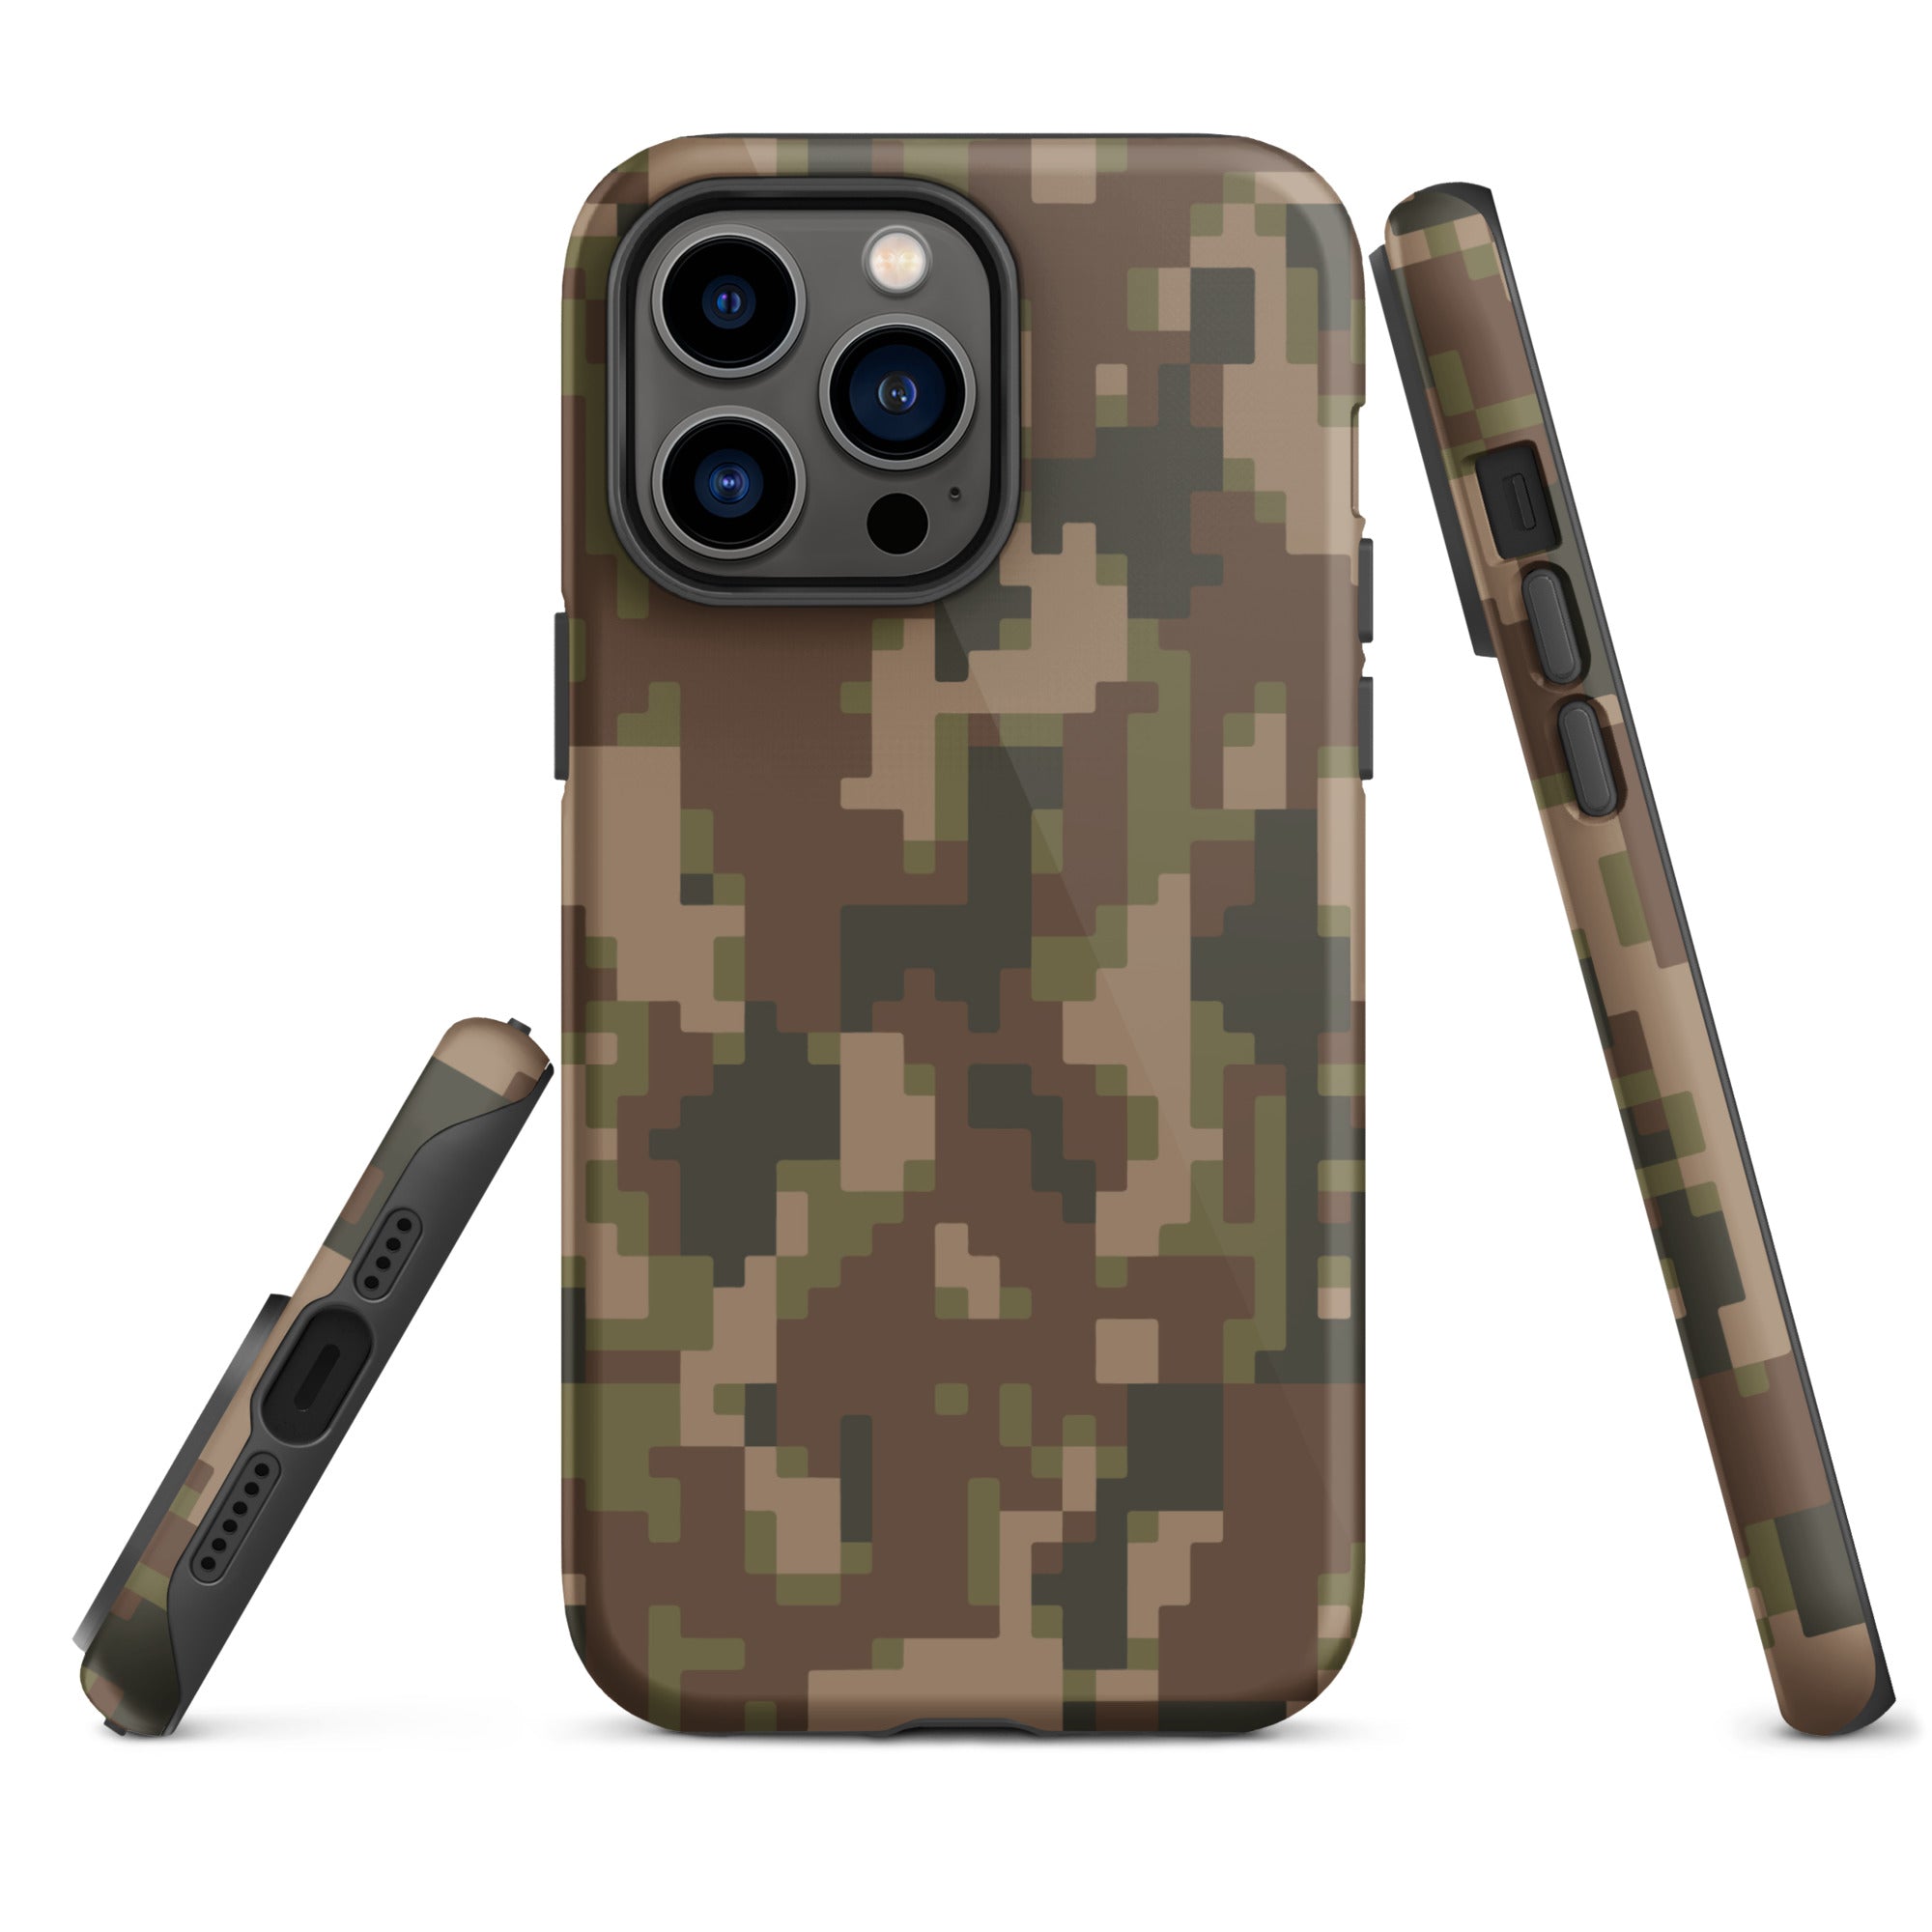 Coque d'iPhone® rigide -  from chtmboutique by chtmboutique - Coques et protections - Accessoires pour iPhone, iphone, camo, cmouflage, militaire